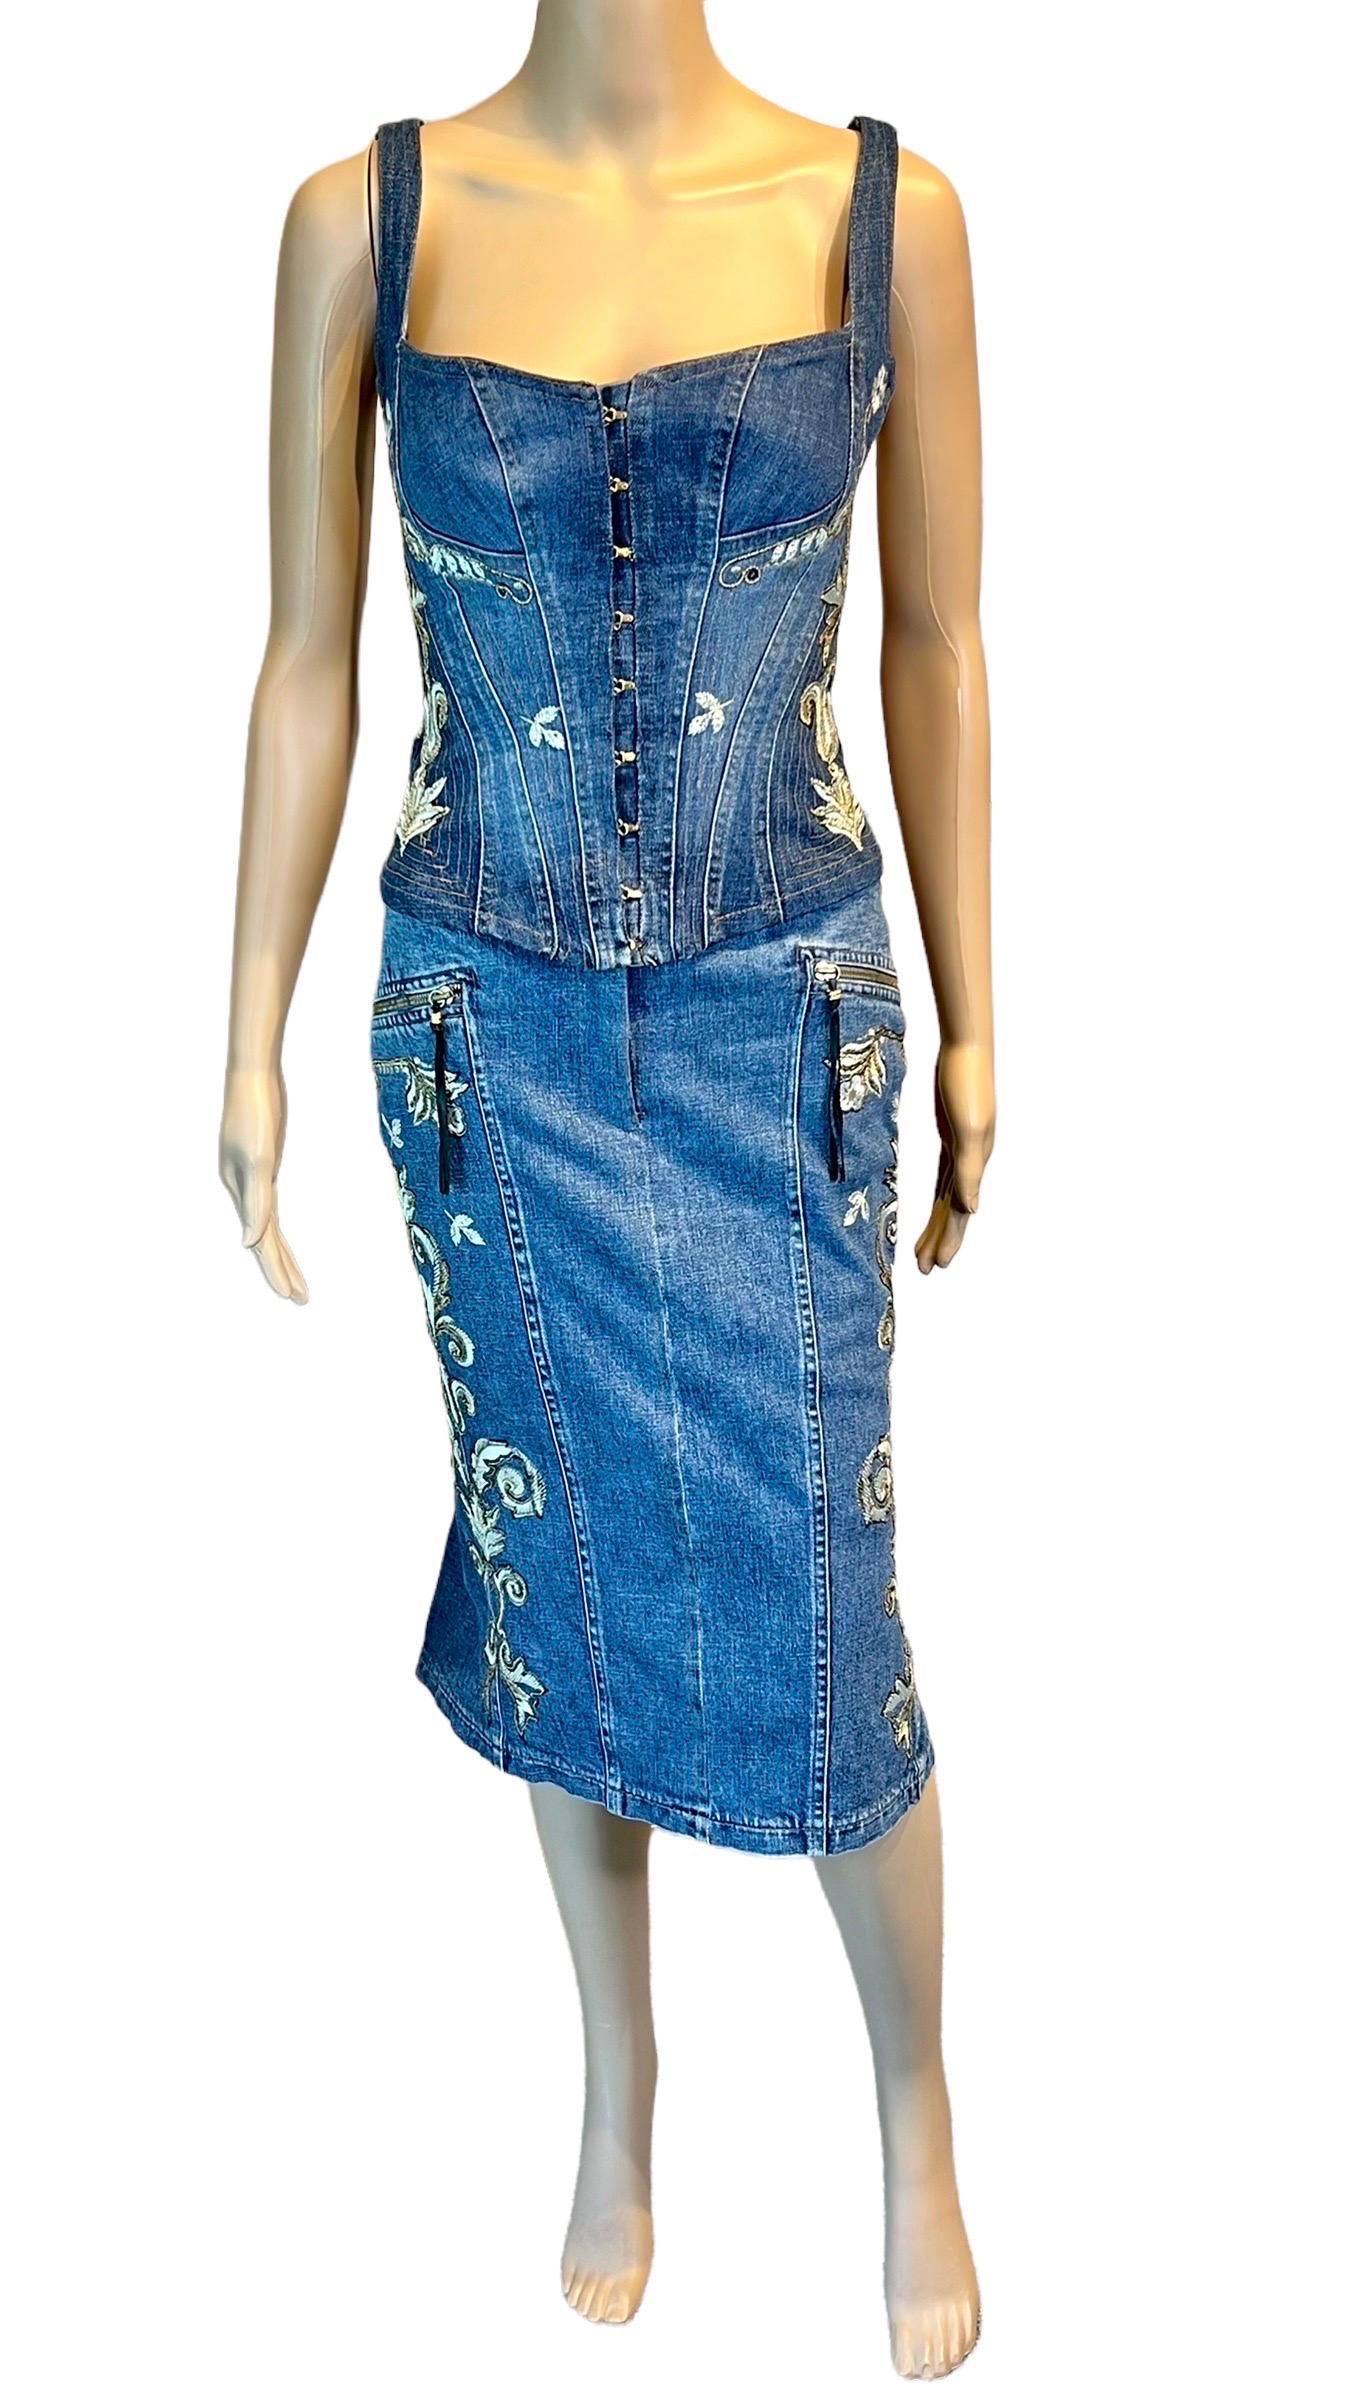 Roberto Cavalli S/S 2003 Embroidered Corset Bustier Denim Top & Skirt 2 Piece Set Ensemble Size S/M

Please note the skirt is size S and the top is size M.


